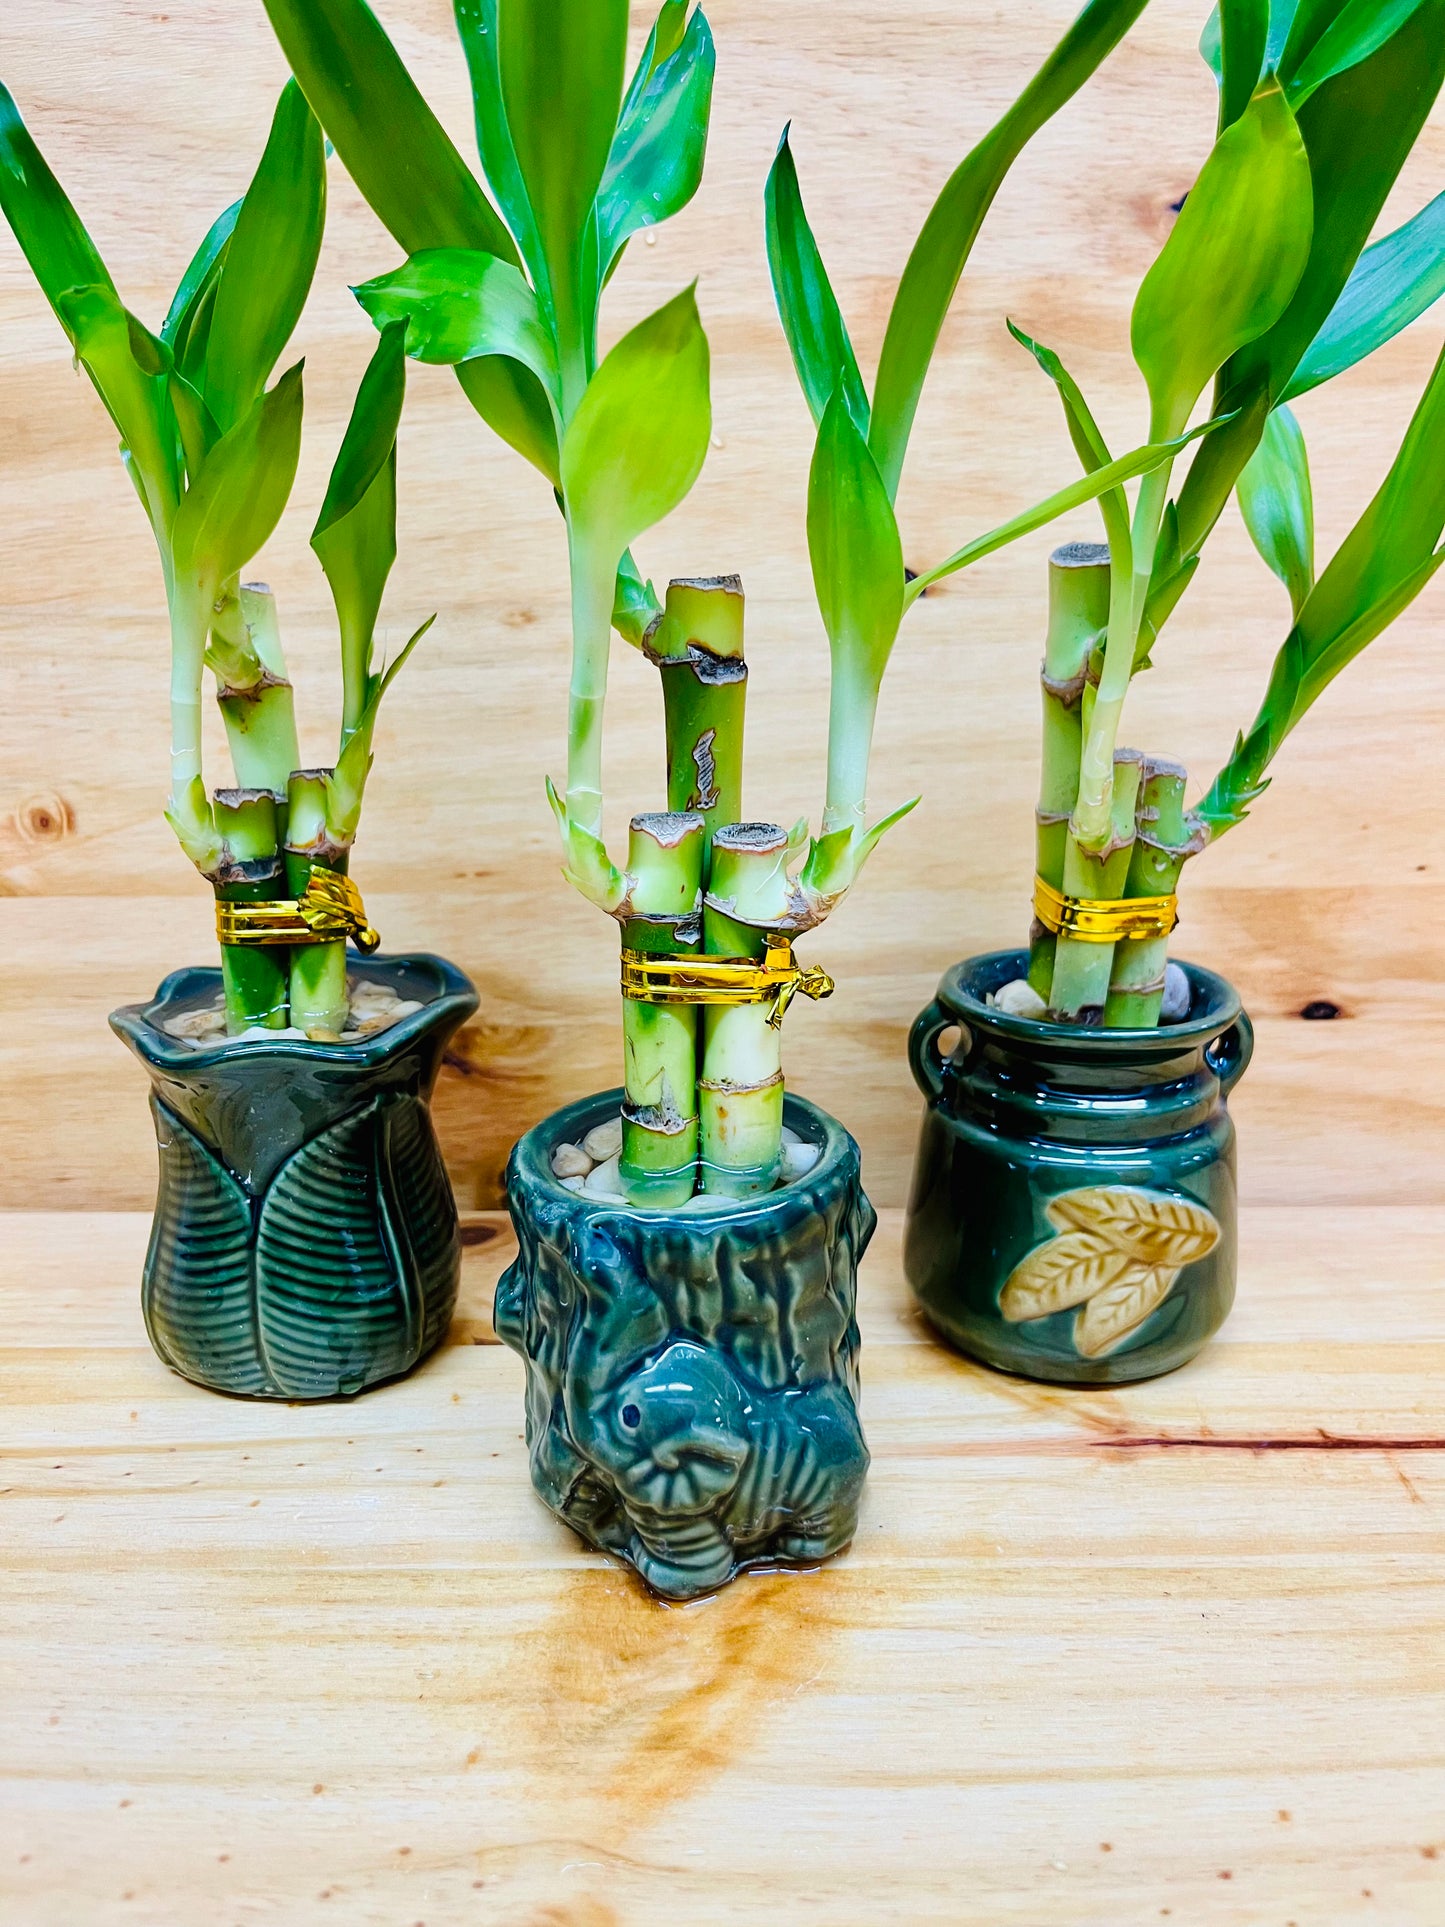 3 Pack Live Lucky Bamboo 4”4”6” Collection in Ceramic Vases